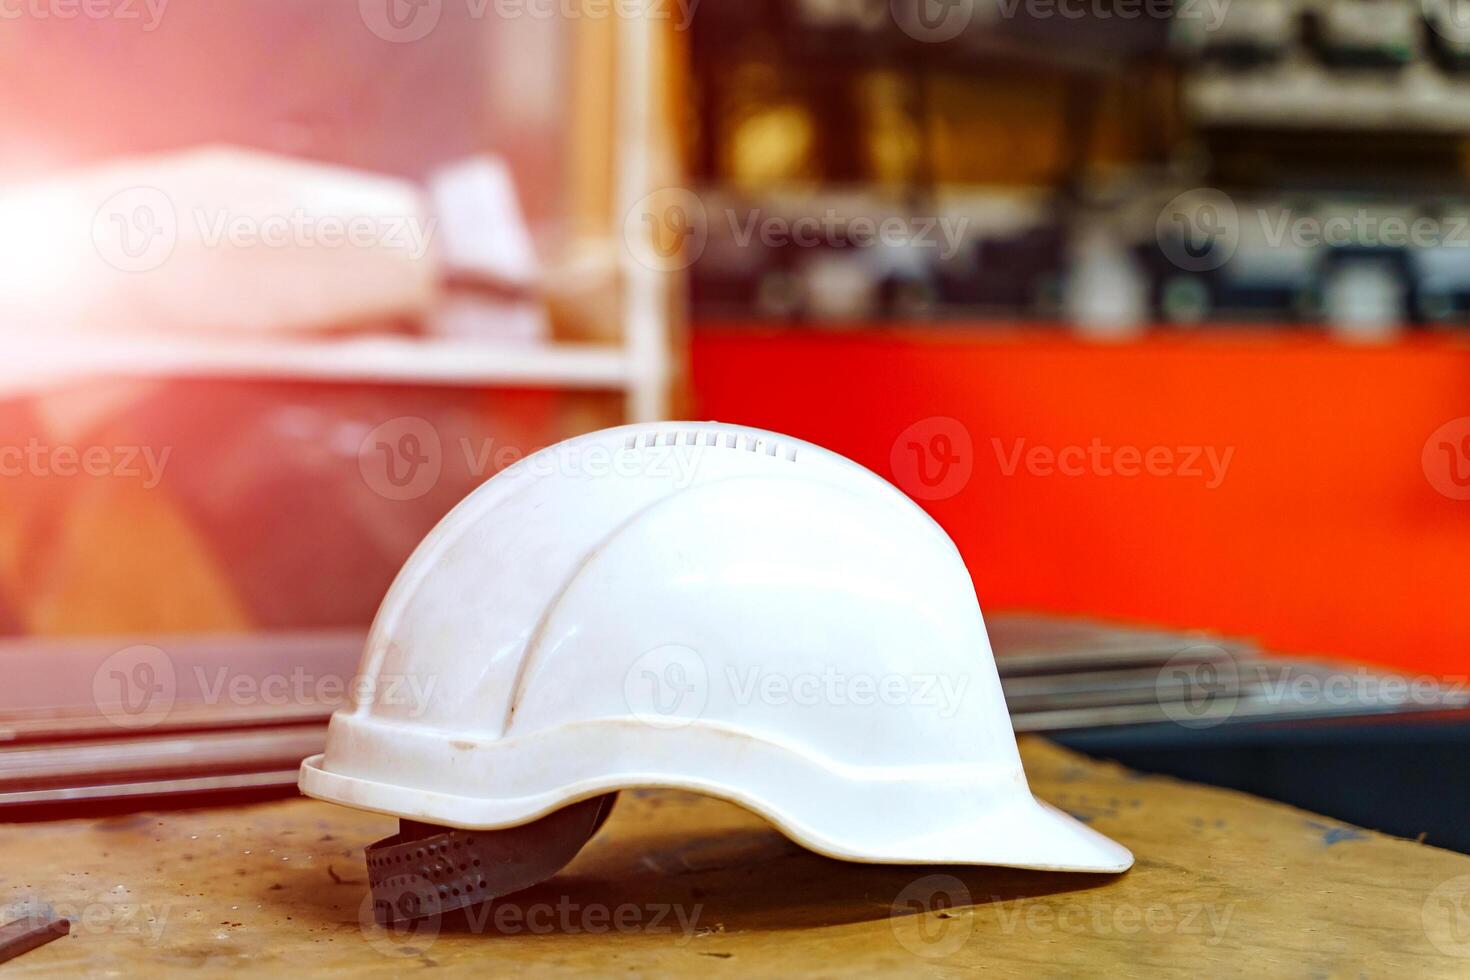 Plastic helmet for workers security. Close up view of helmet for security on construction site photo